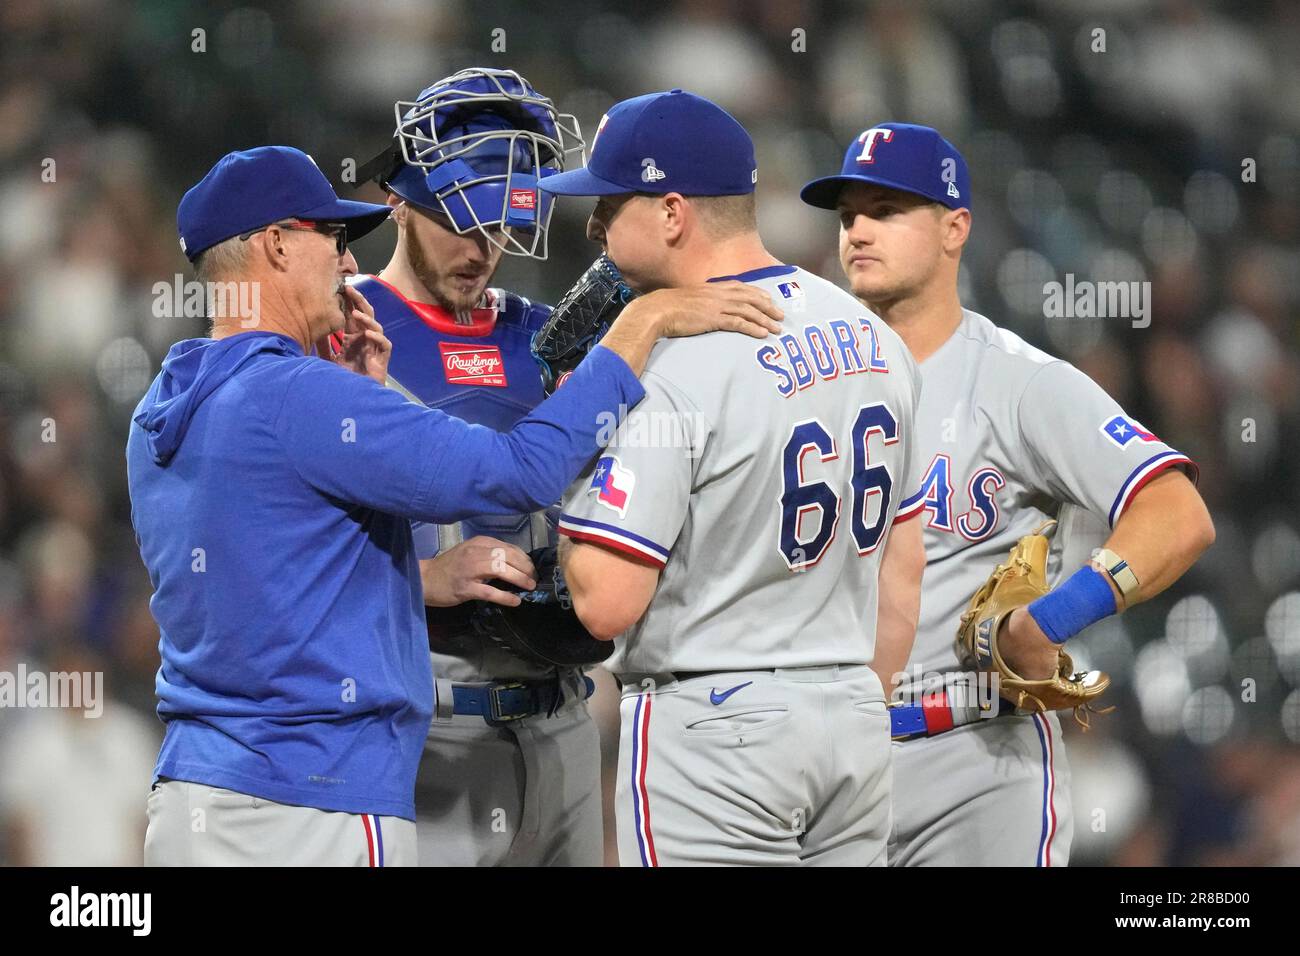 Texas Rangers pitching coach Mike Maddux talks to relief pitcher Josh Sborz as catcher Jonah Heim and third baseman Josh Jung listen during a baseball game against the Chicago White Sox Monday,